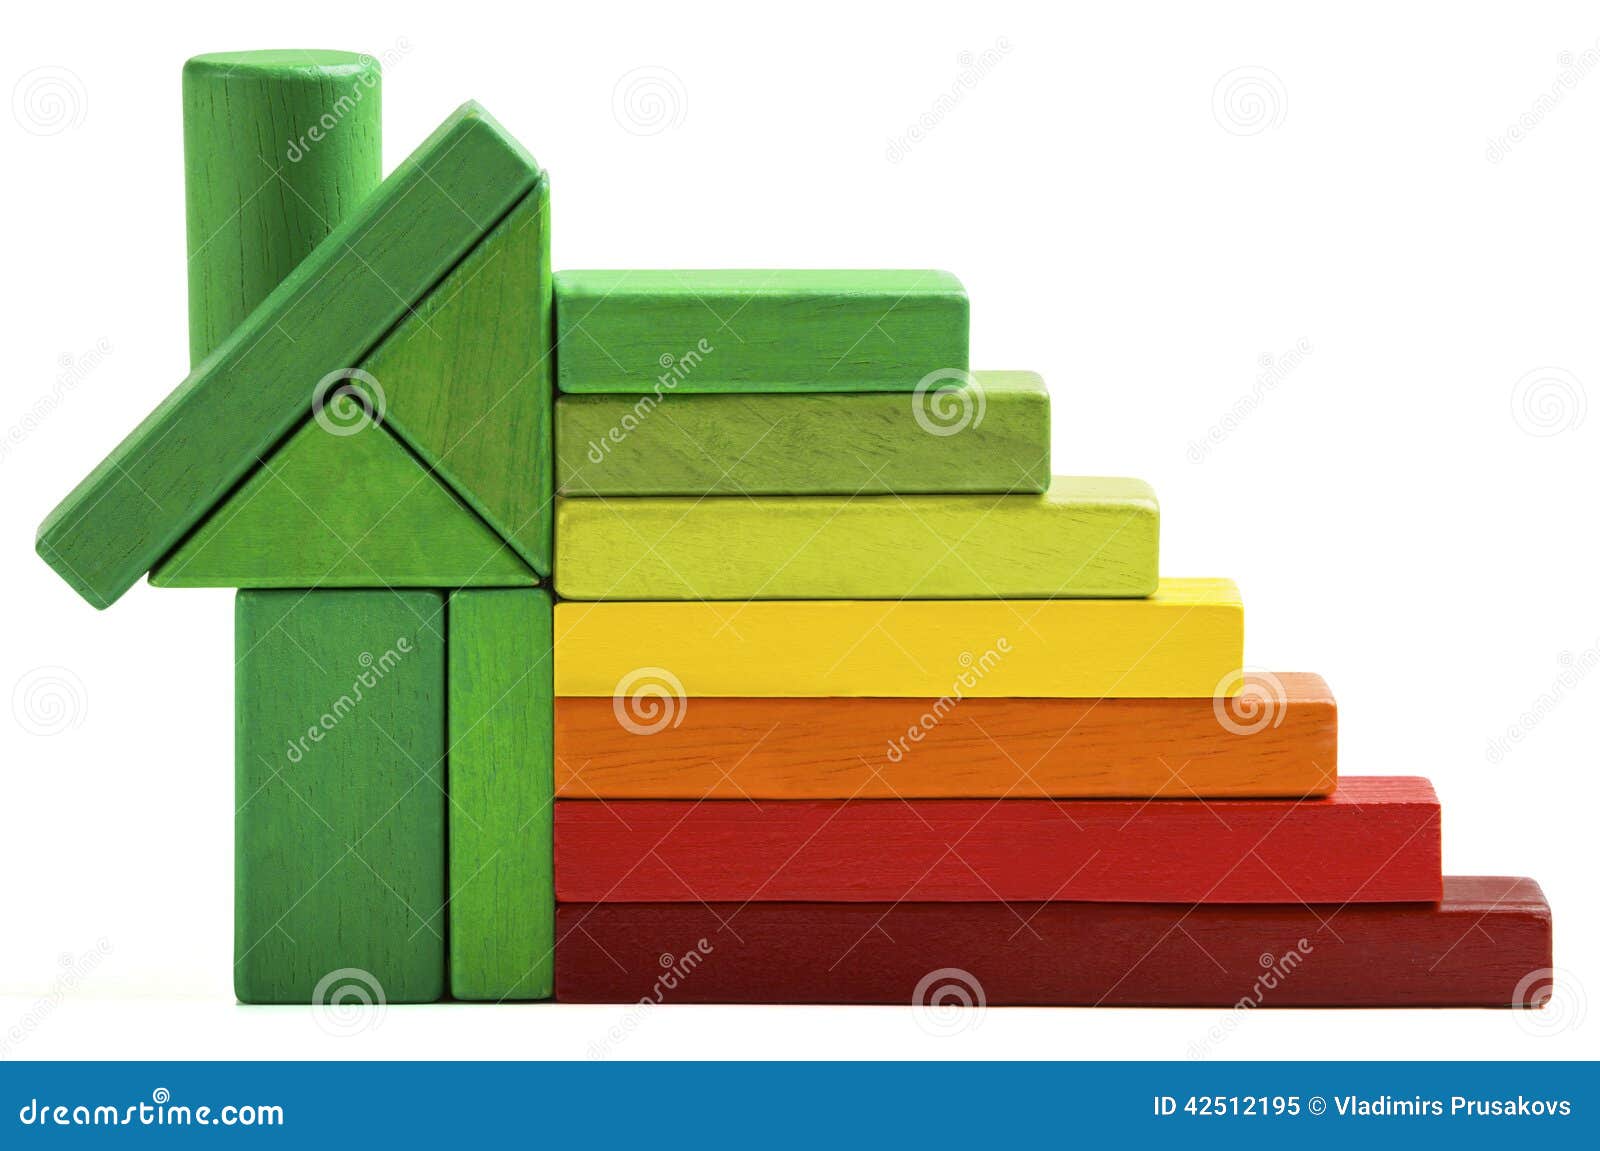 house energy efficiency rating, green home save heat and ecology